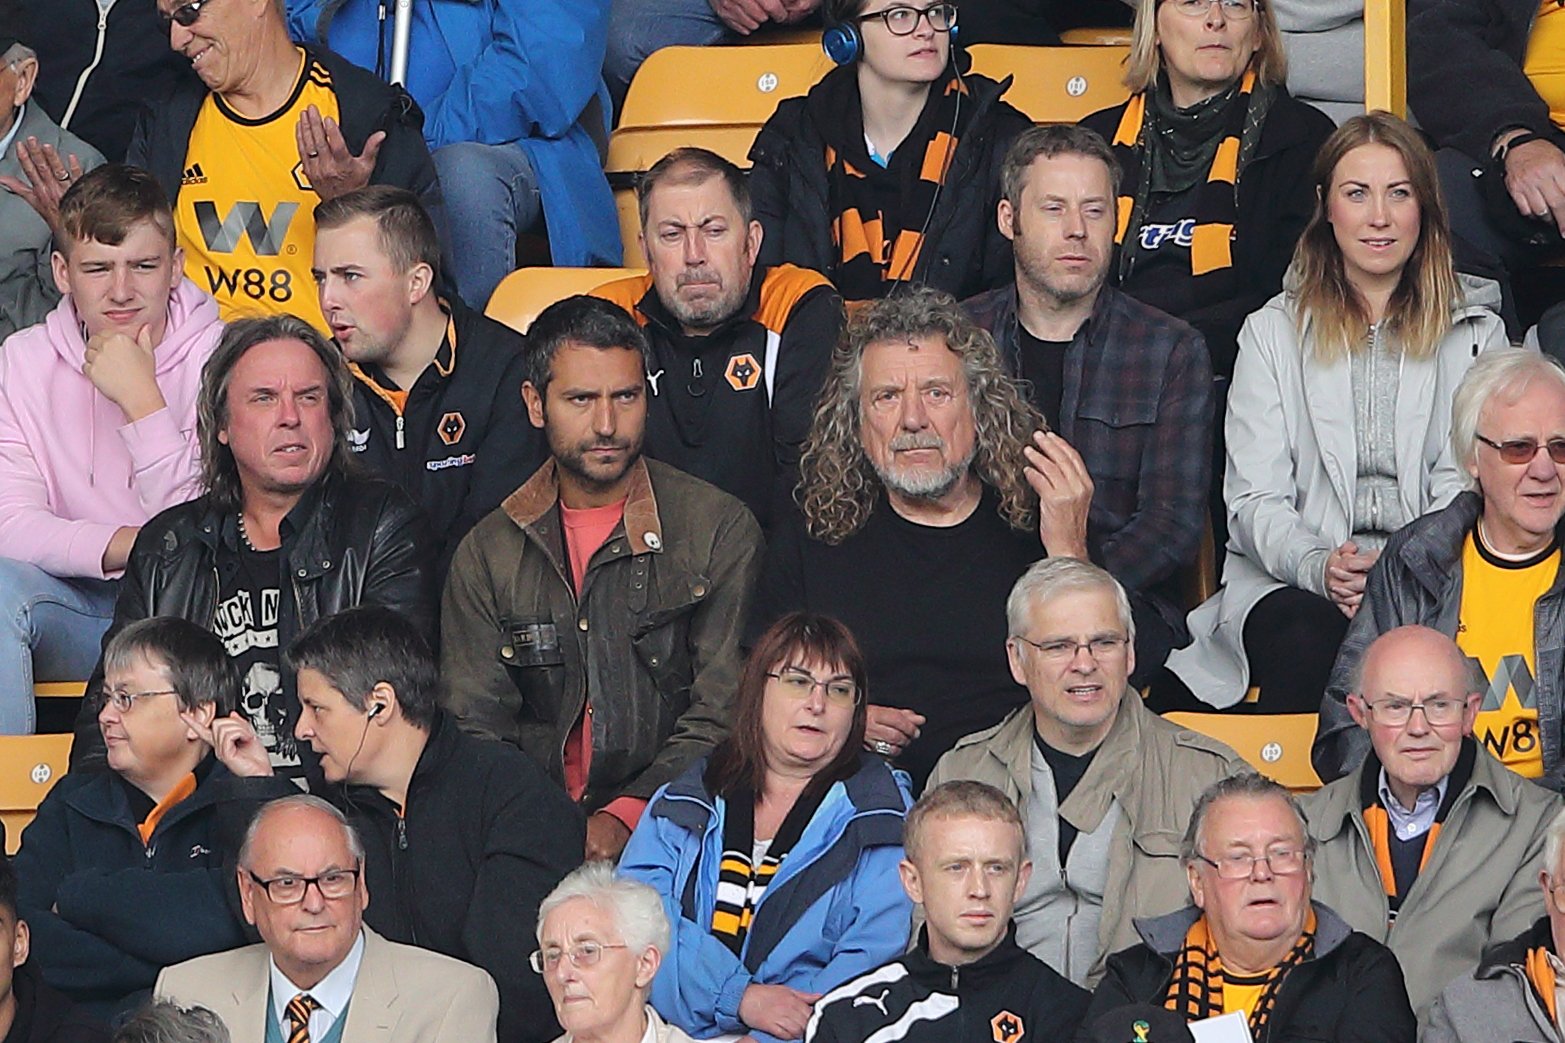 Logan Plant and Robert Plant in the middle of the seating area during a Premier League match on August 25, 2018 in Wolverhampton |  Source: Getty Images